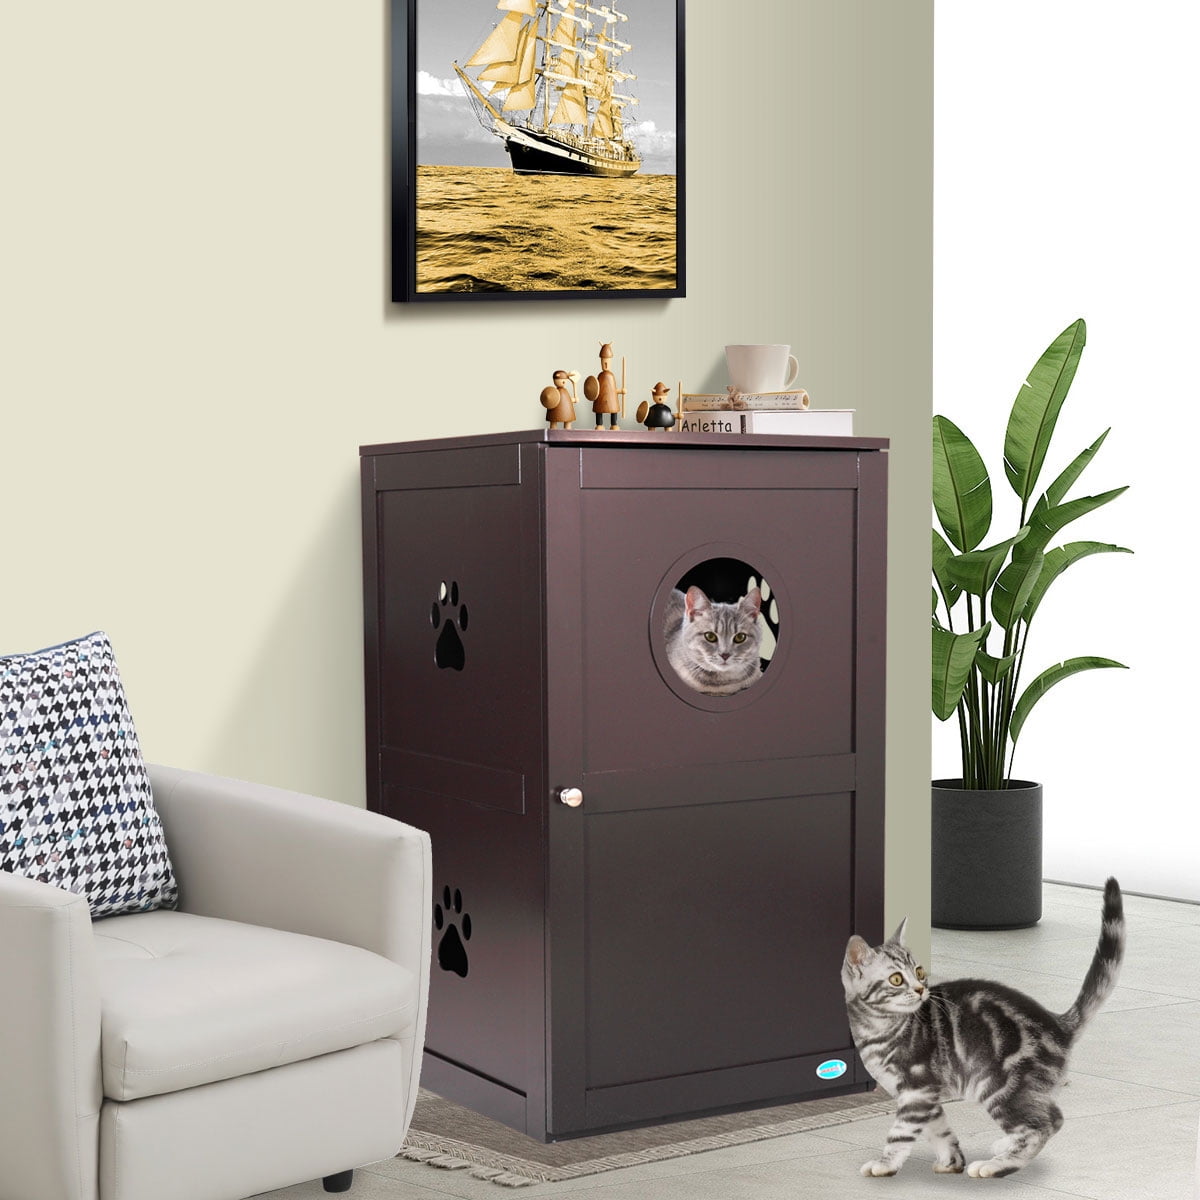 New Cat End Table for Small Space